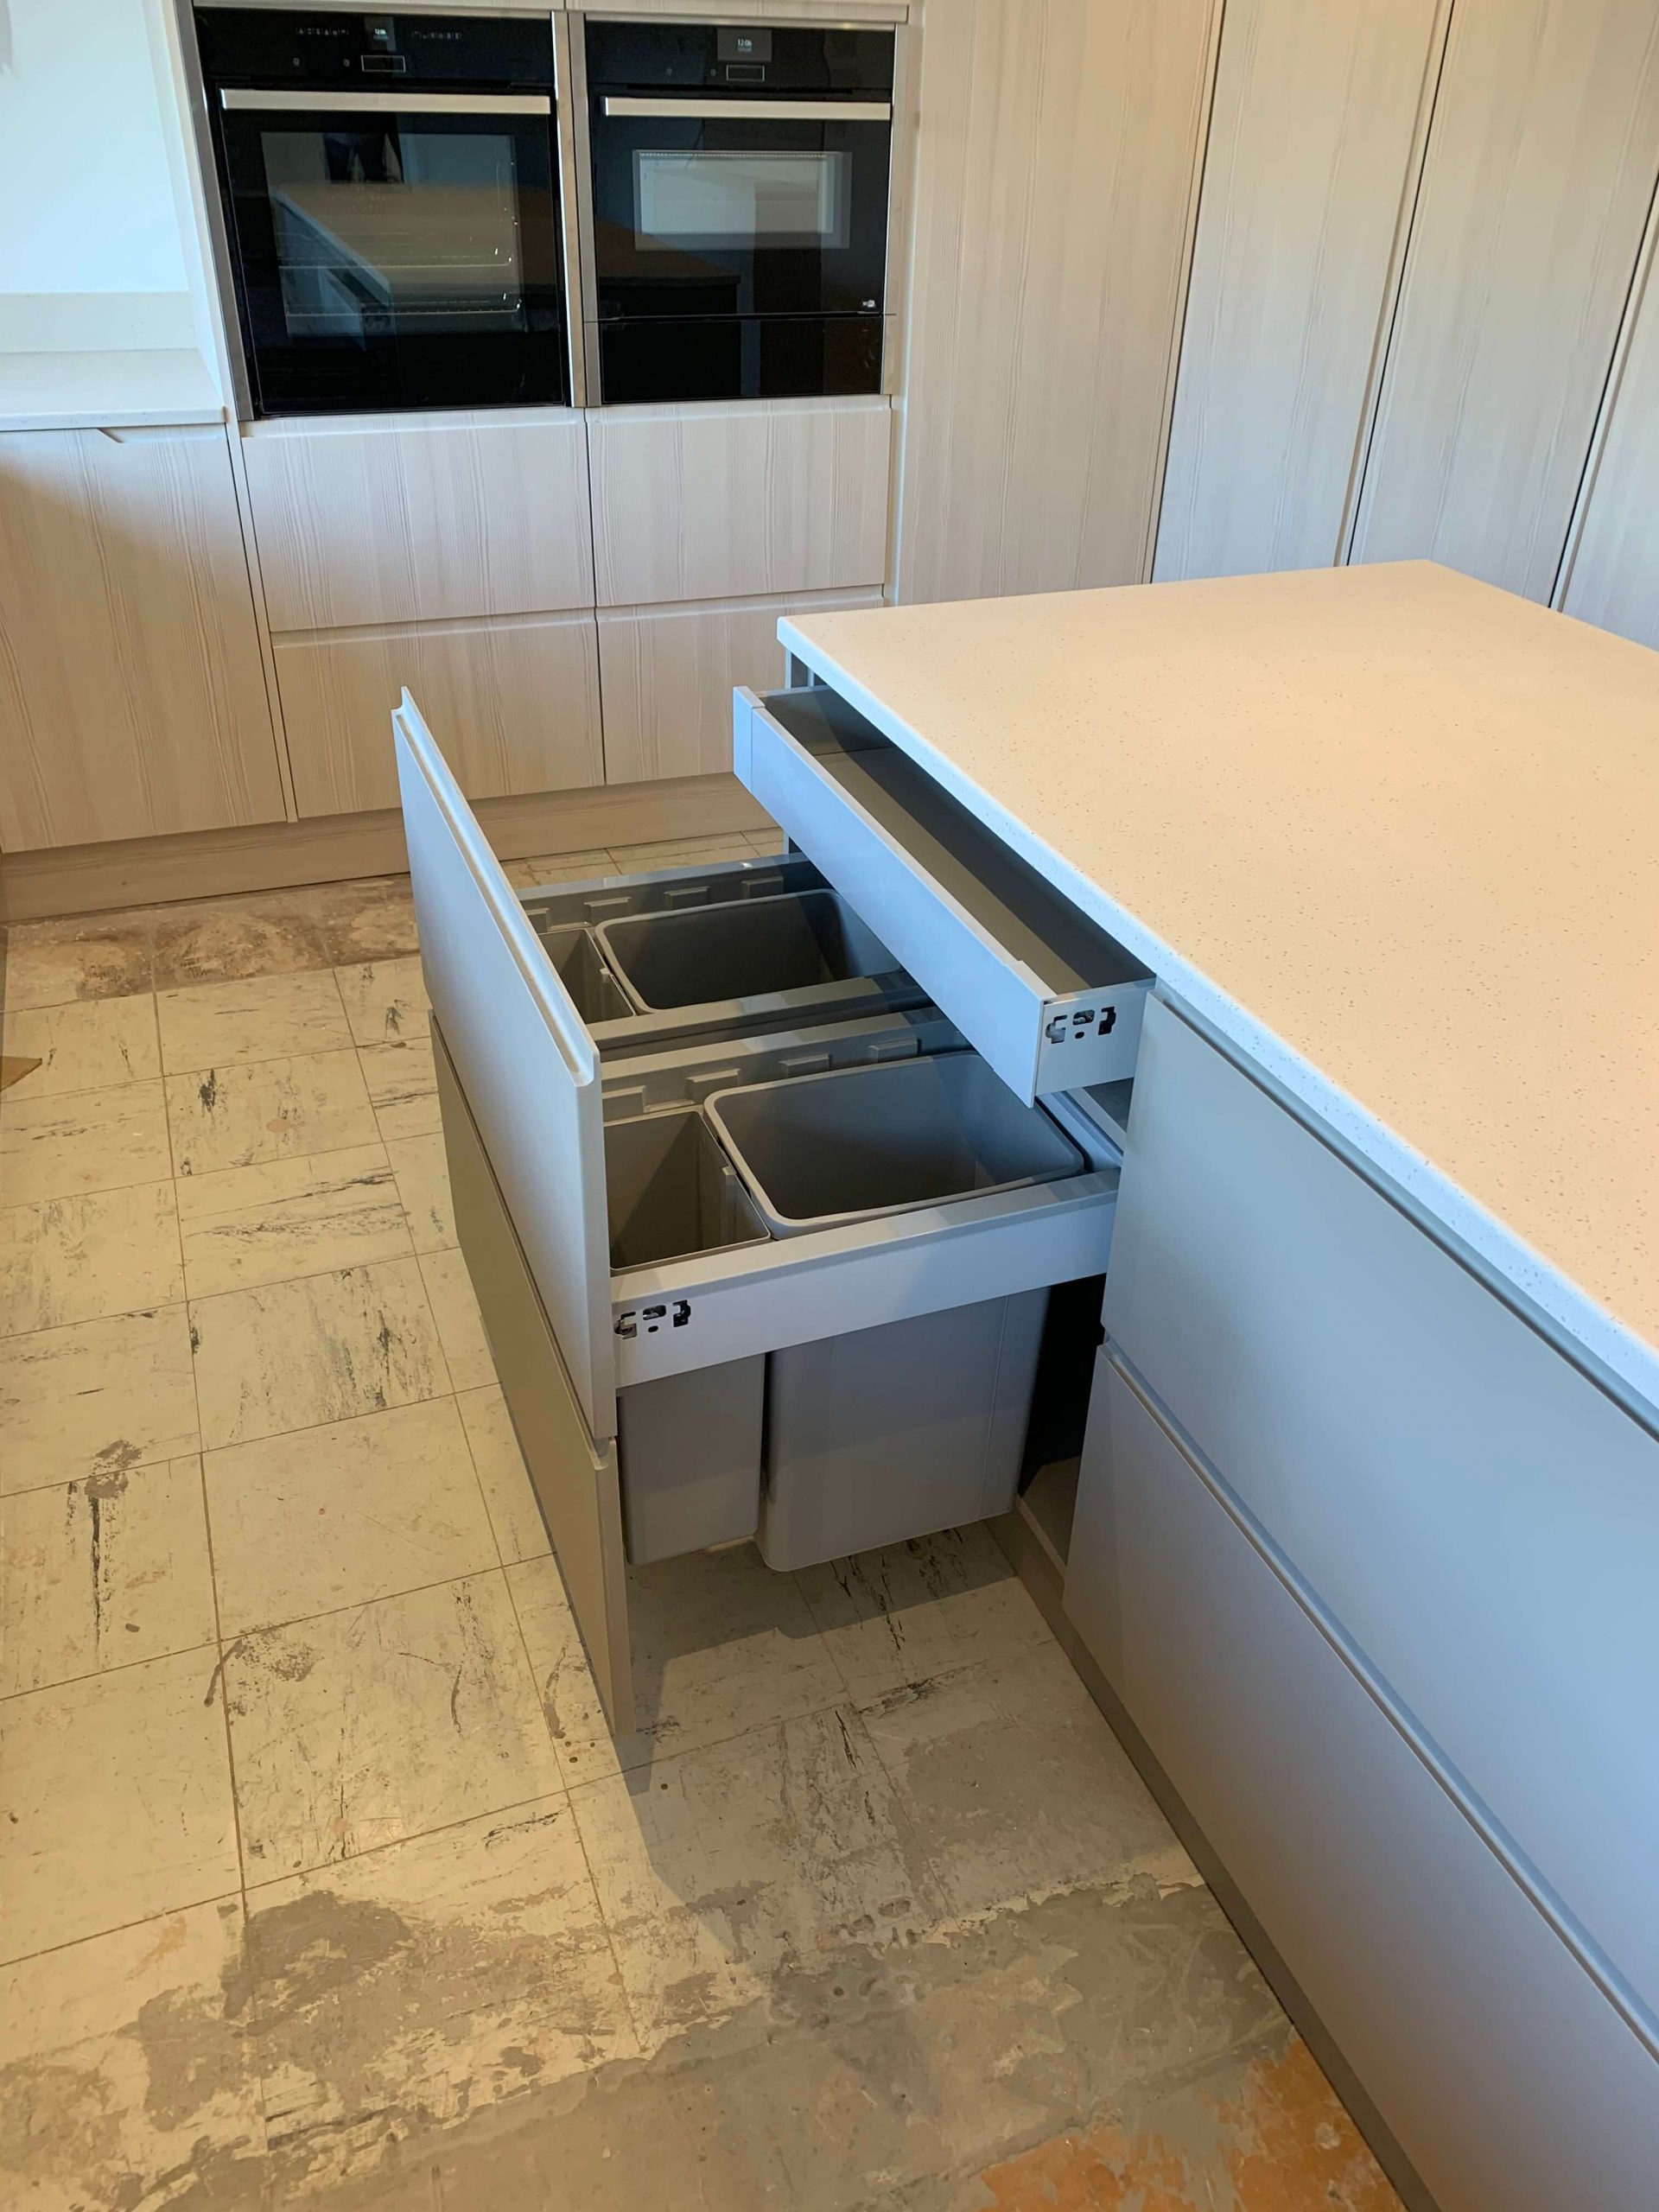 Twin Waste Bins With Secret Drawer Above